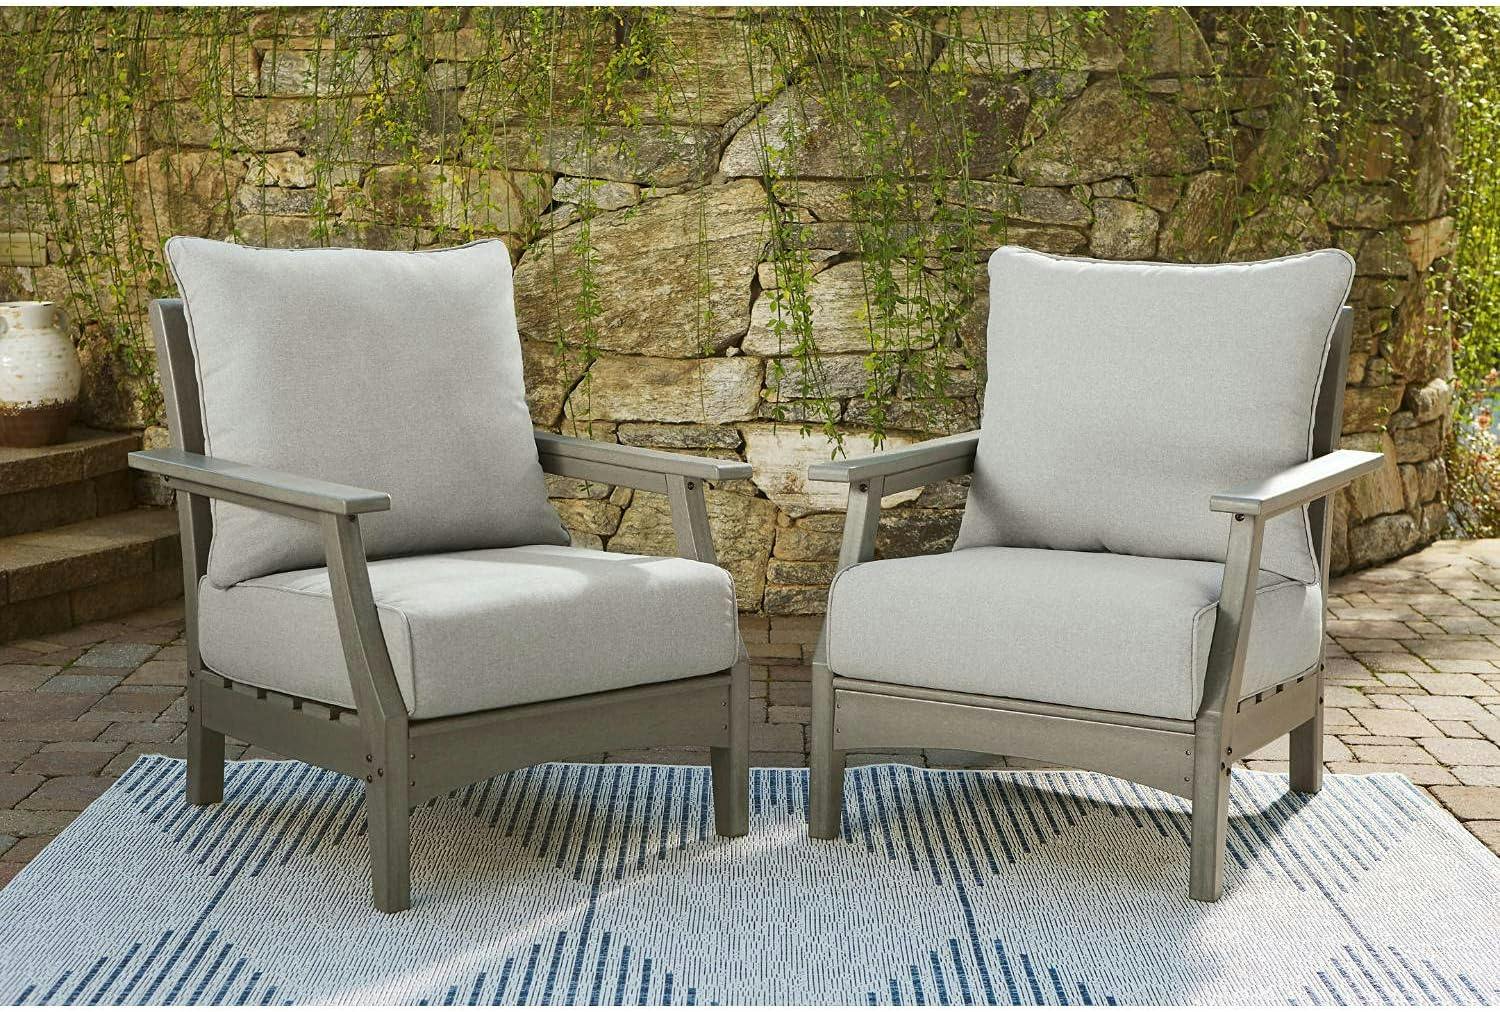 Transitional Gray HDPE Outdoor Lounge Chair with Cushion